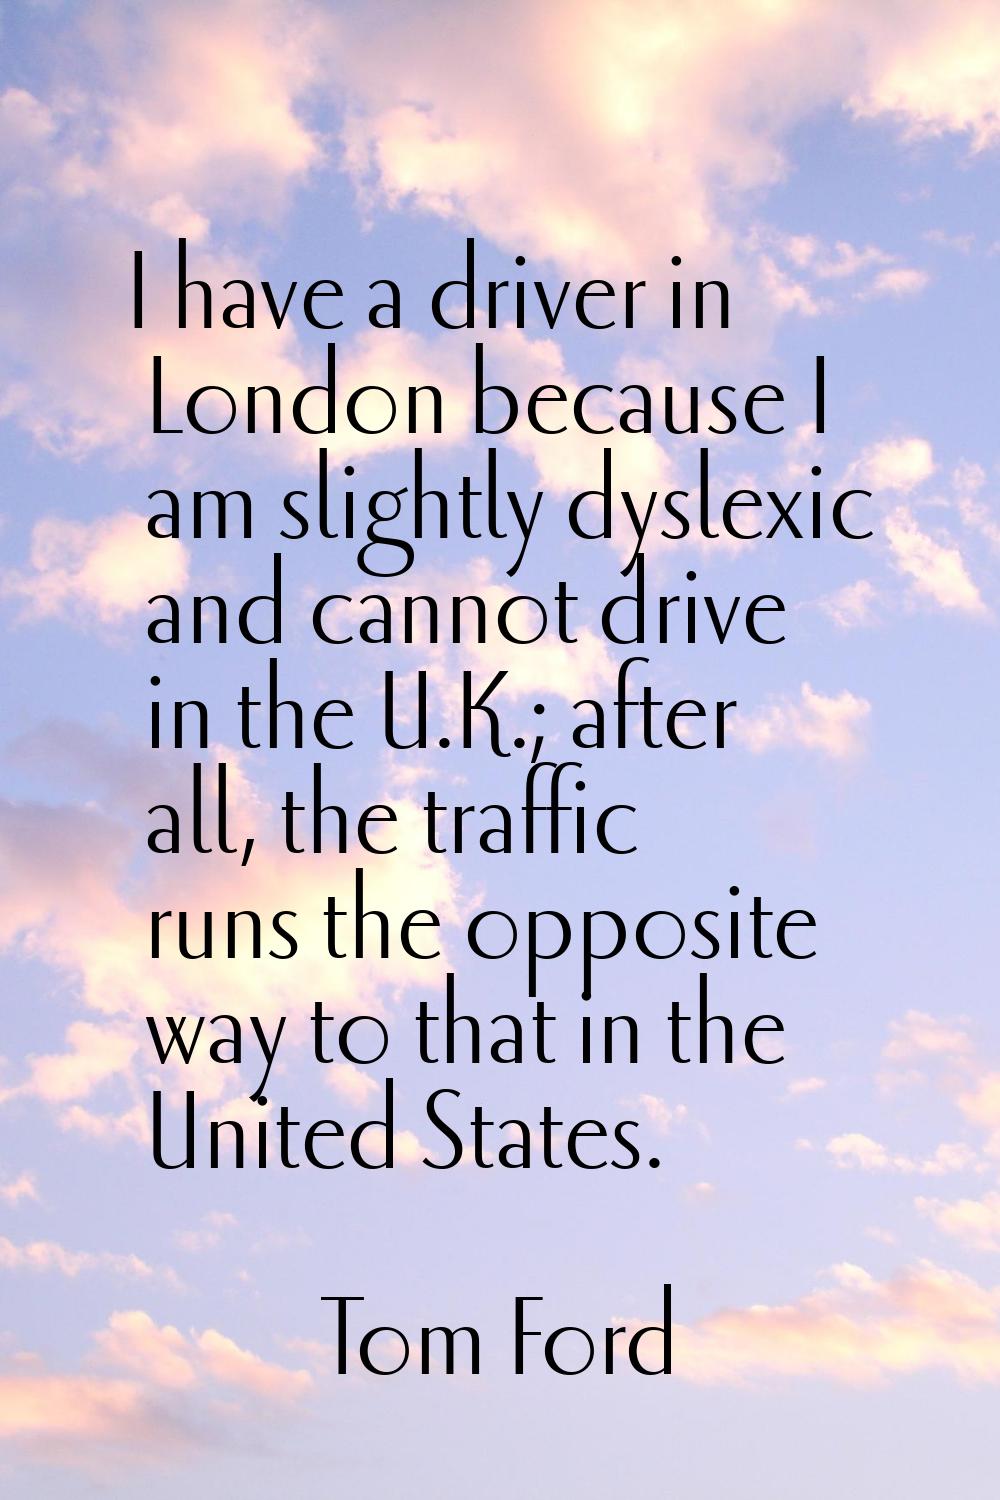 I have a driver in London because I am slightly dyslexic and cannot drive in the U.K.; after all, t